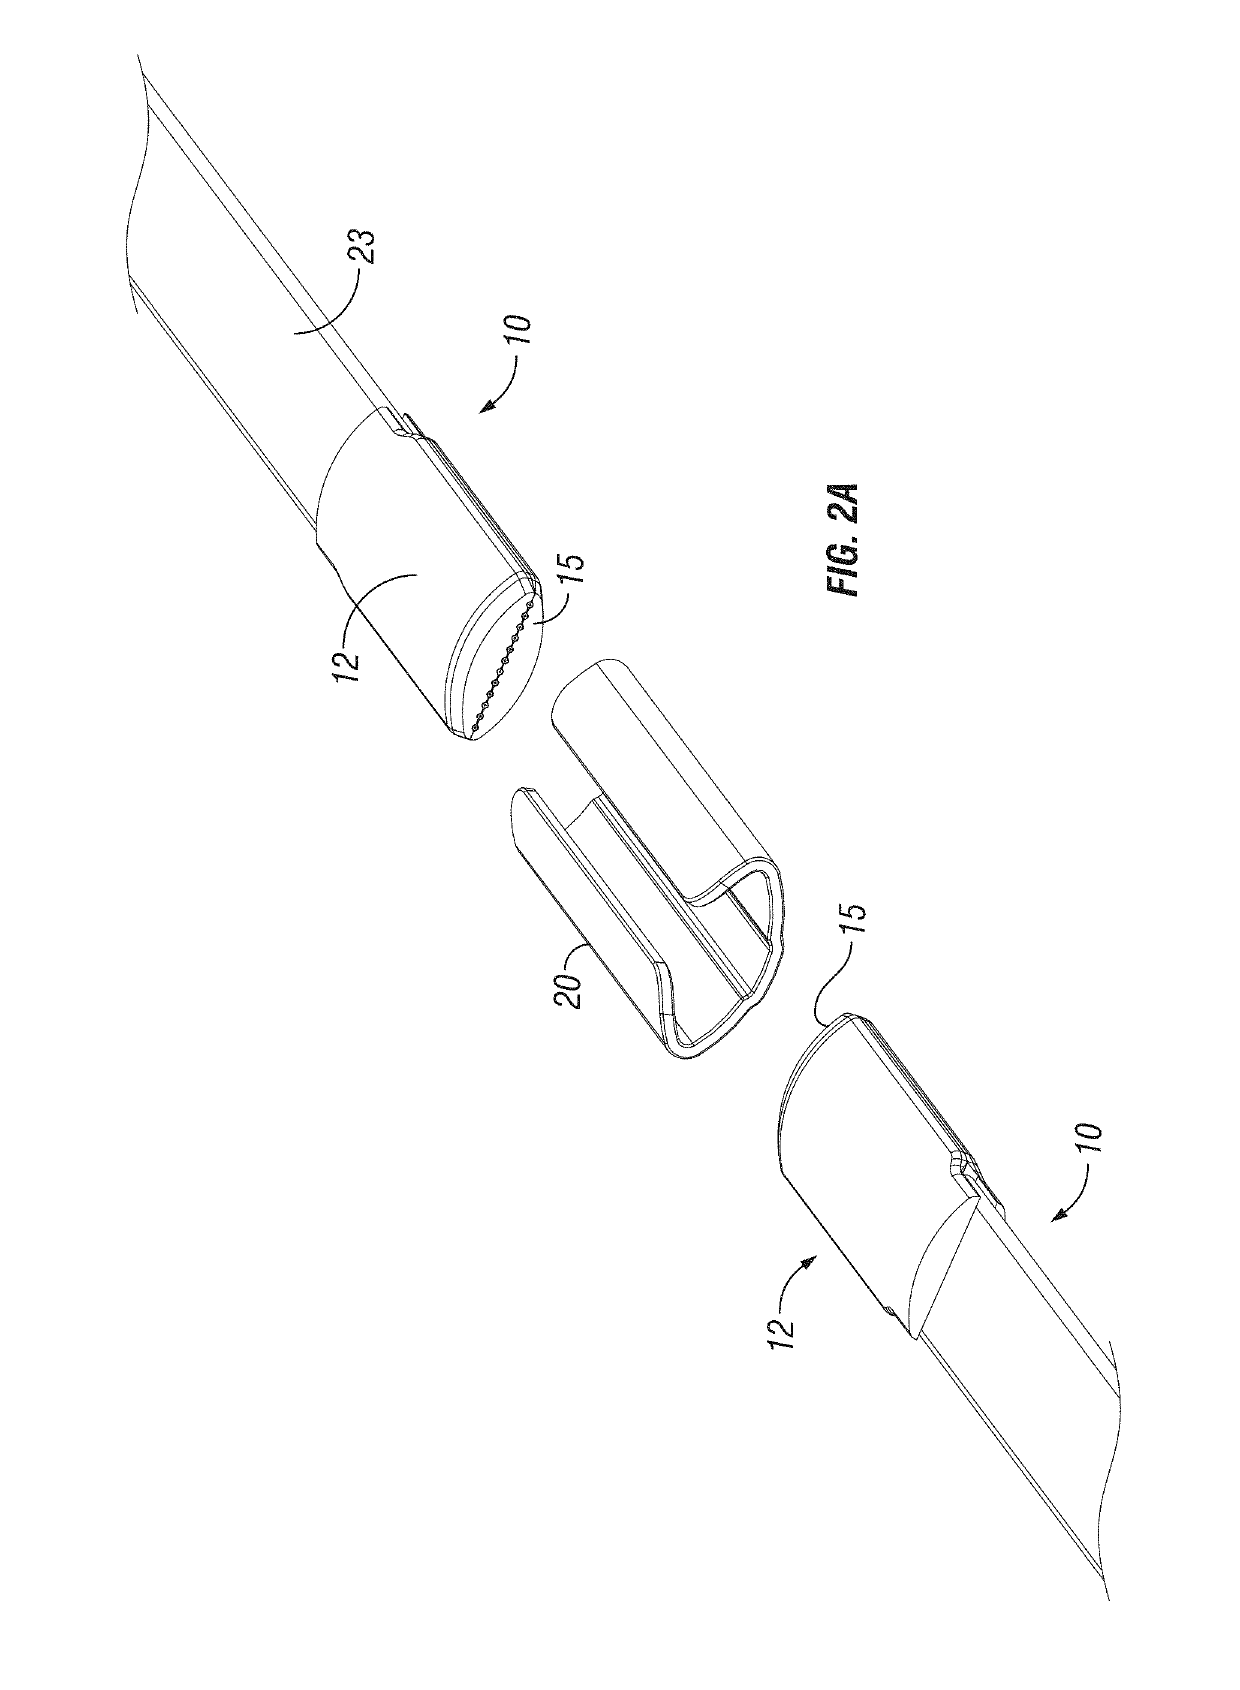 Optical fiber connector ferrule having curved external alignment surface